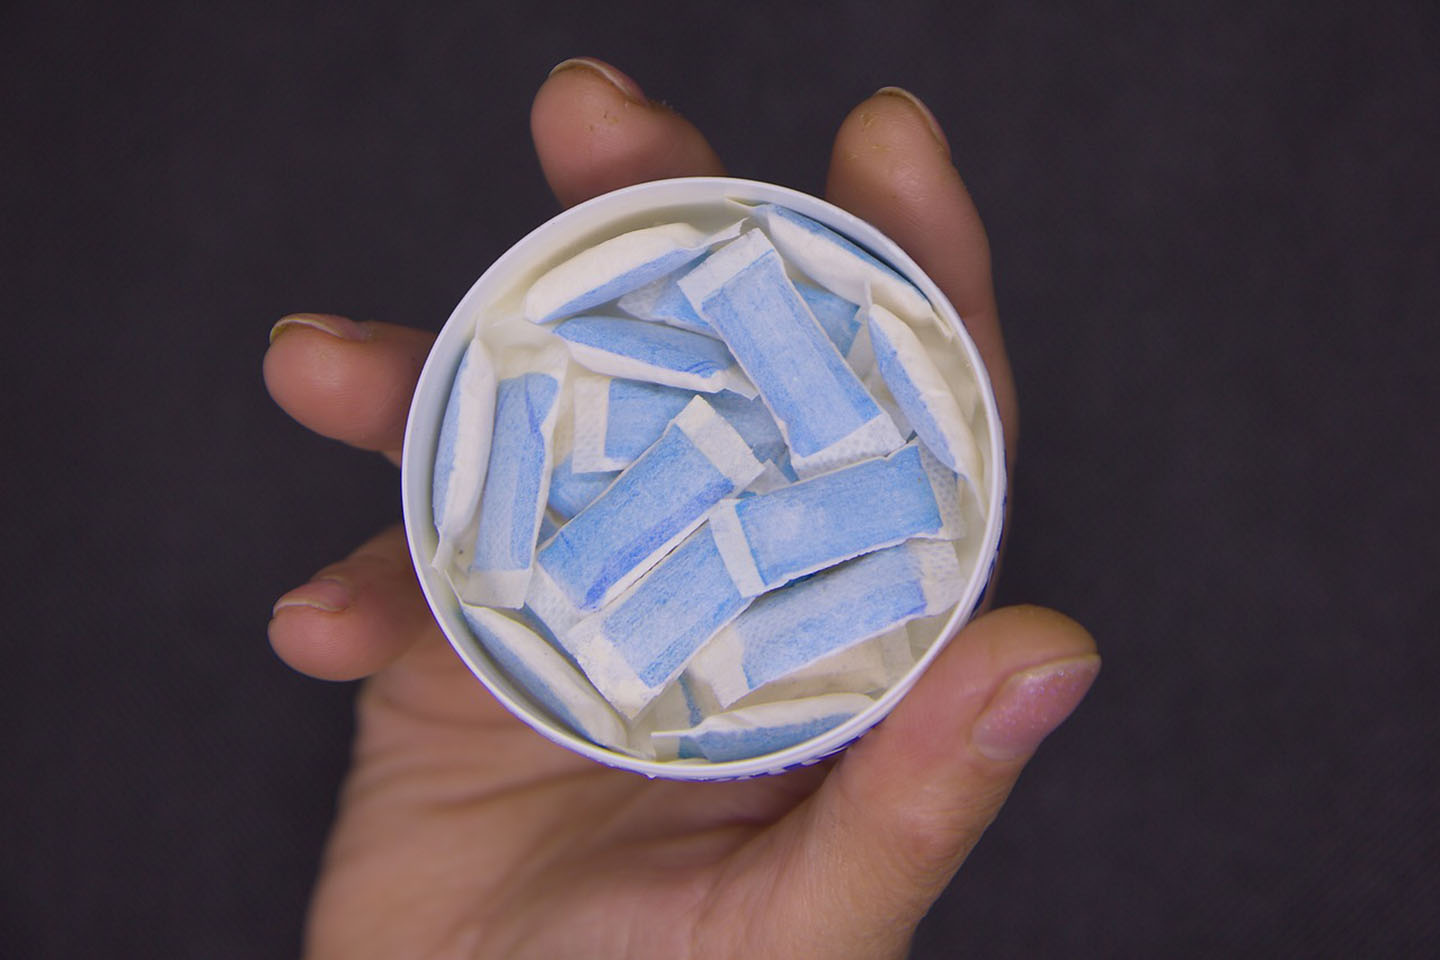 Person holding tin of blue and white nicotine pouches